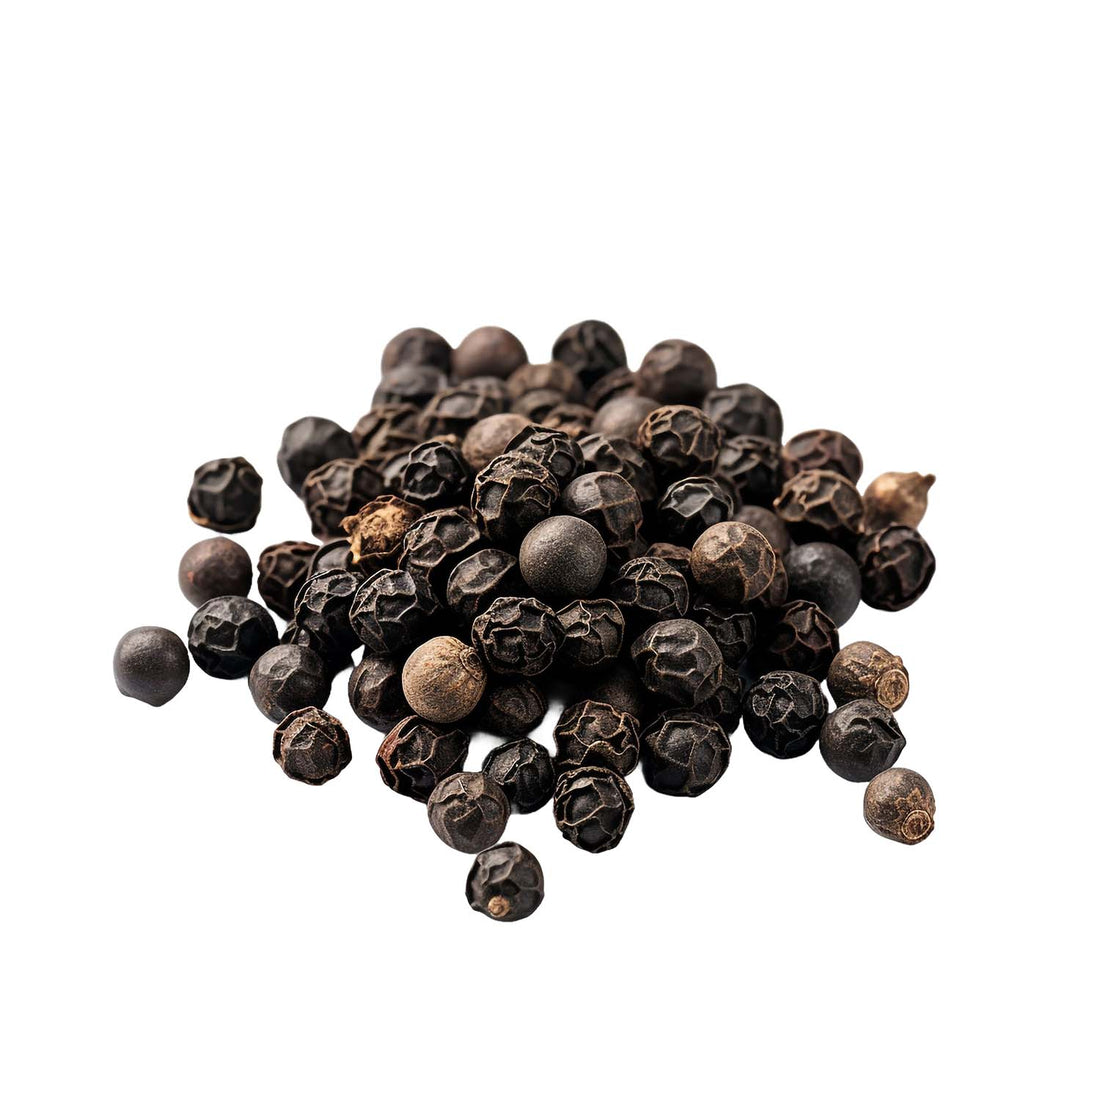 Black pepper for acne-prone skin: a natural remedy to combat breakouts and promote clearer complexion.